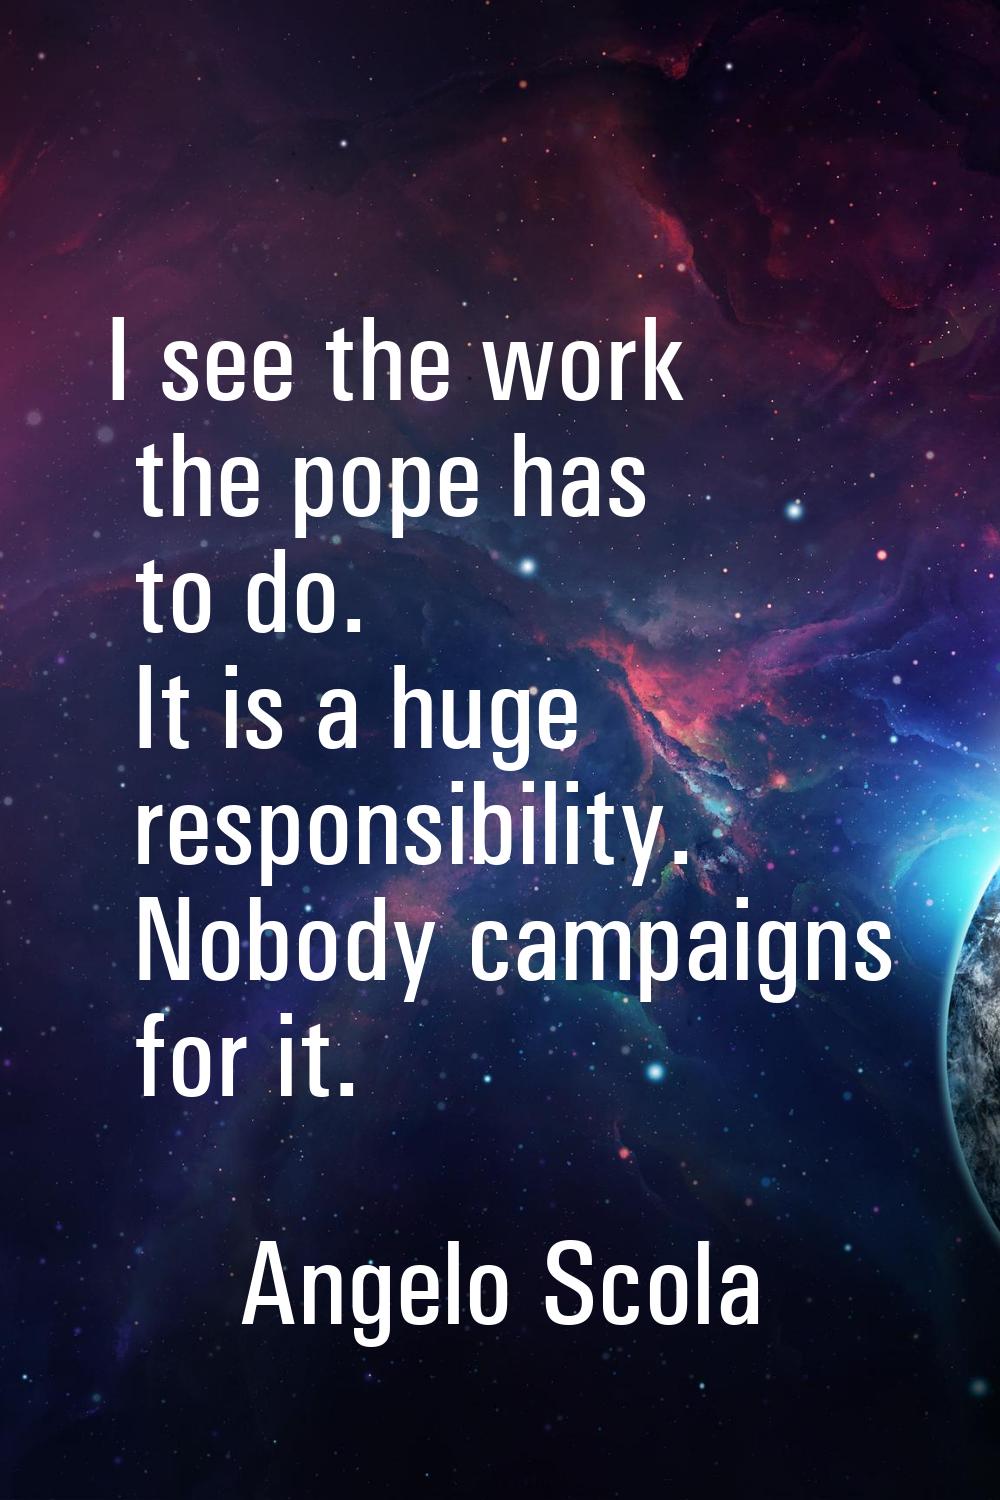 I see the work the pope has to do. It is a huge responsibility. Nobody campaigns for it.